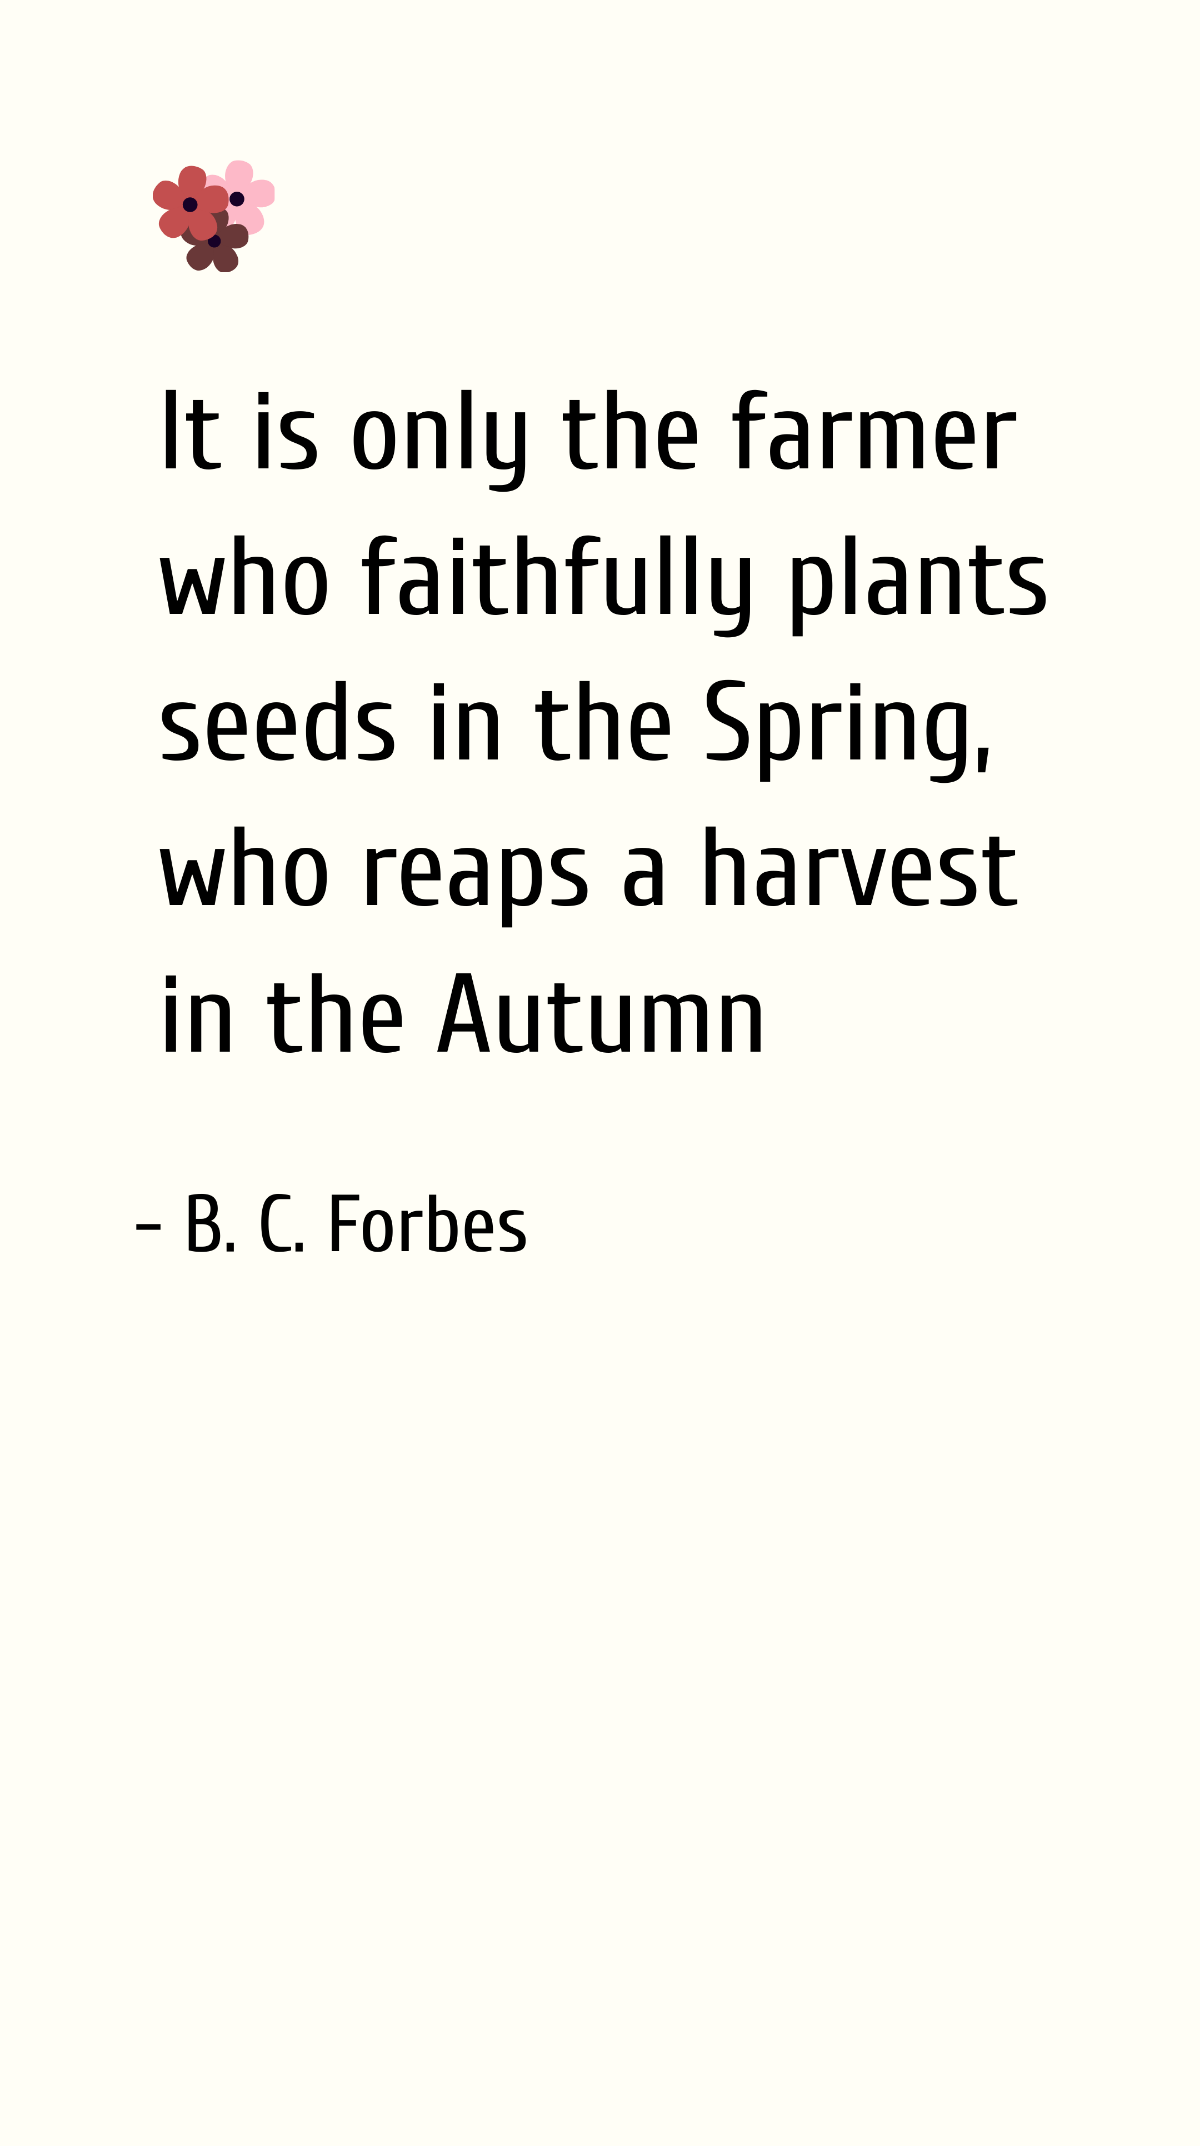 Free B. C. Forbes - It is only the farmer who faithfully plants seeds in the Spring, who reaps a harvest in the Autumn Template